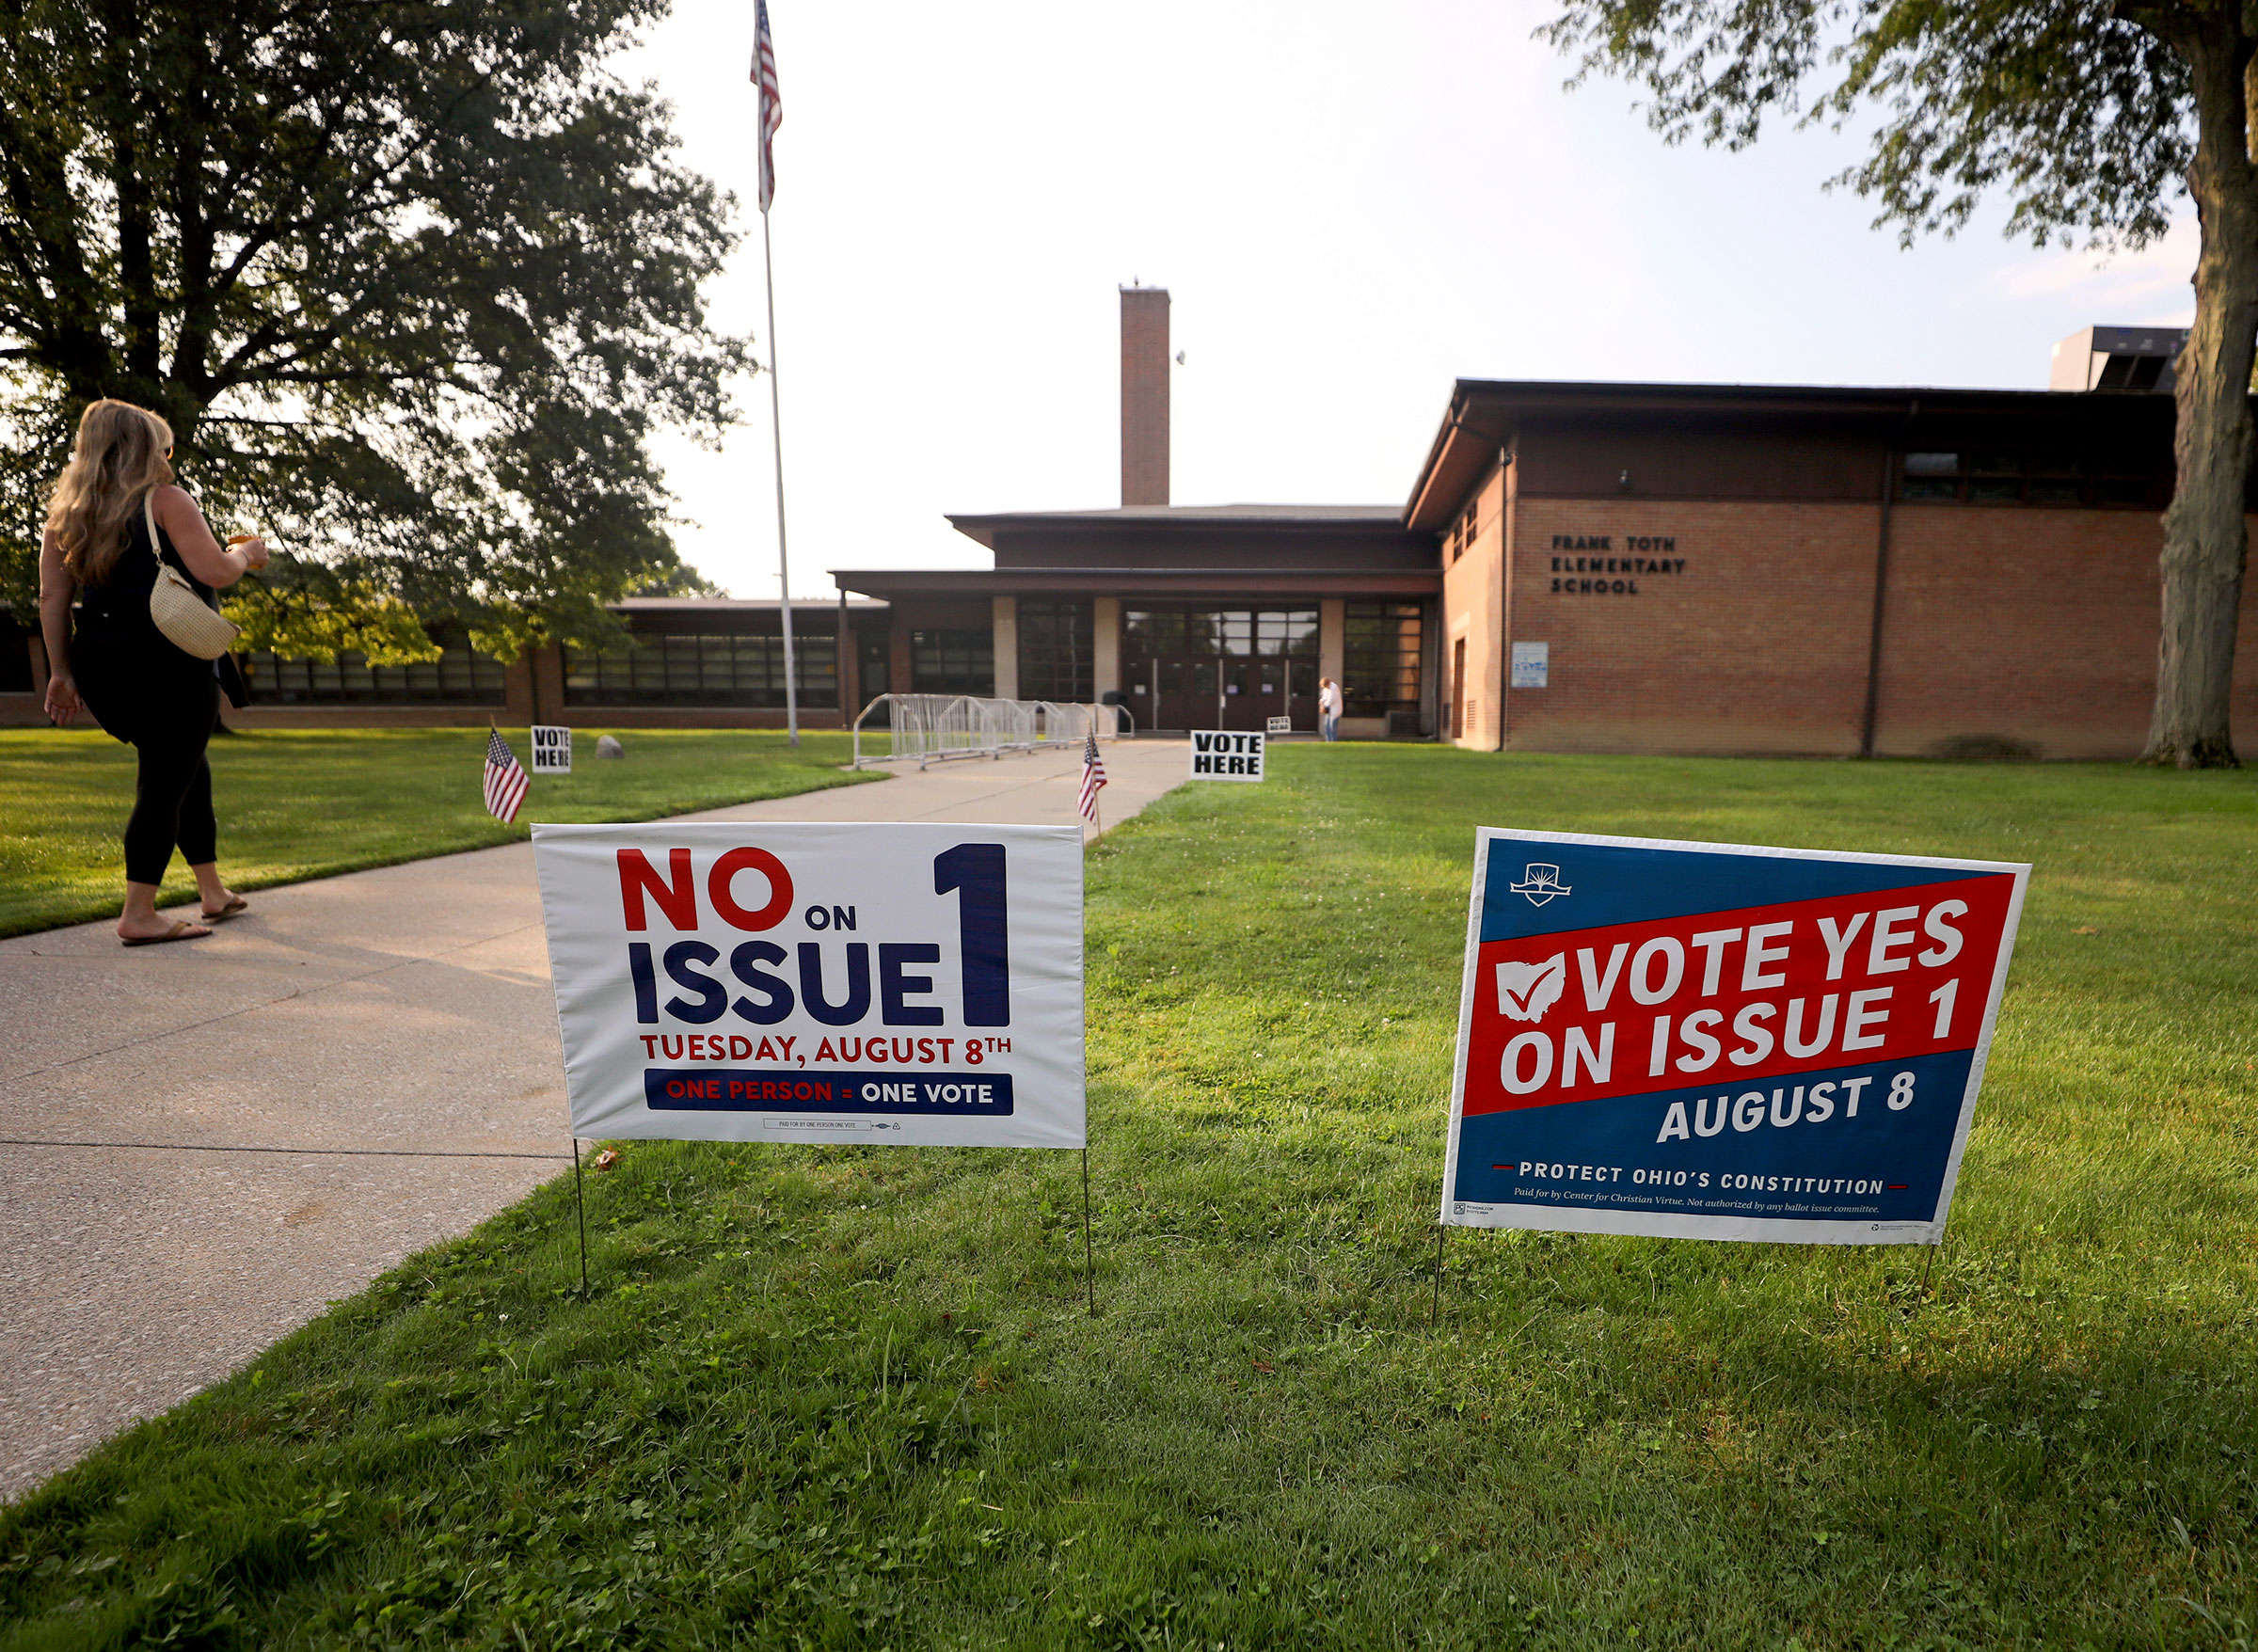 Two opposing signs with slogans posted in the green grass in front of an elementary school where people are going in to vote